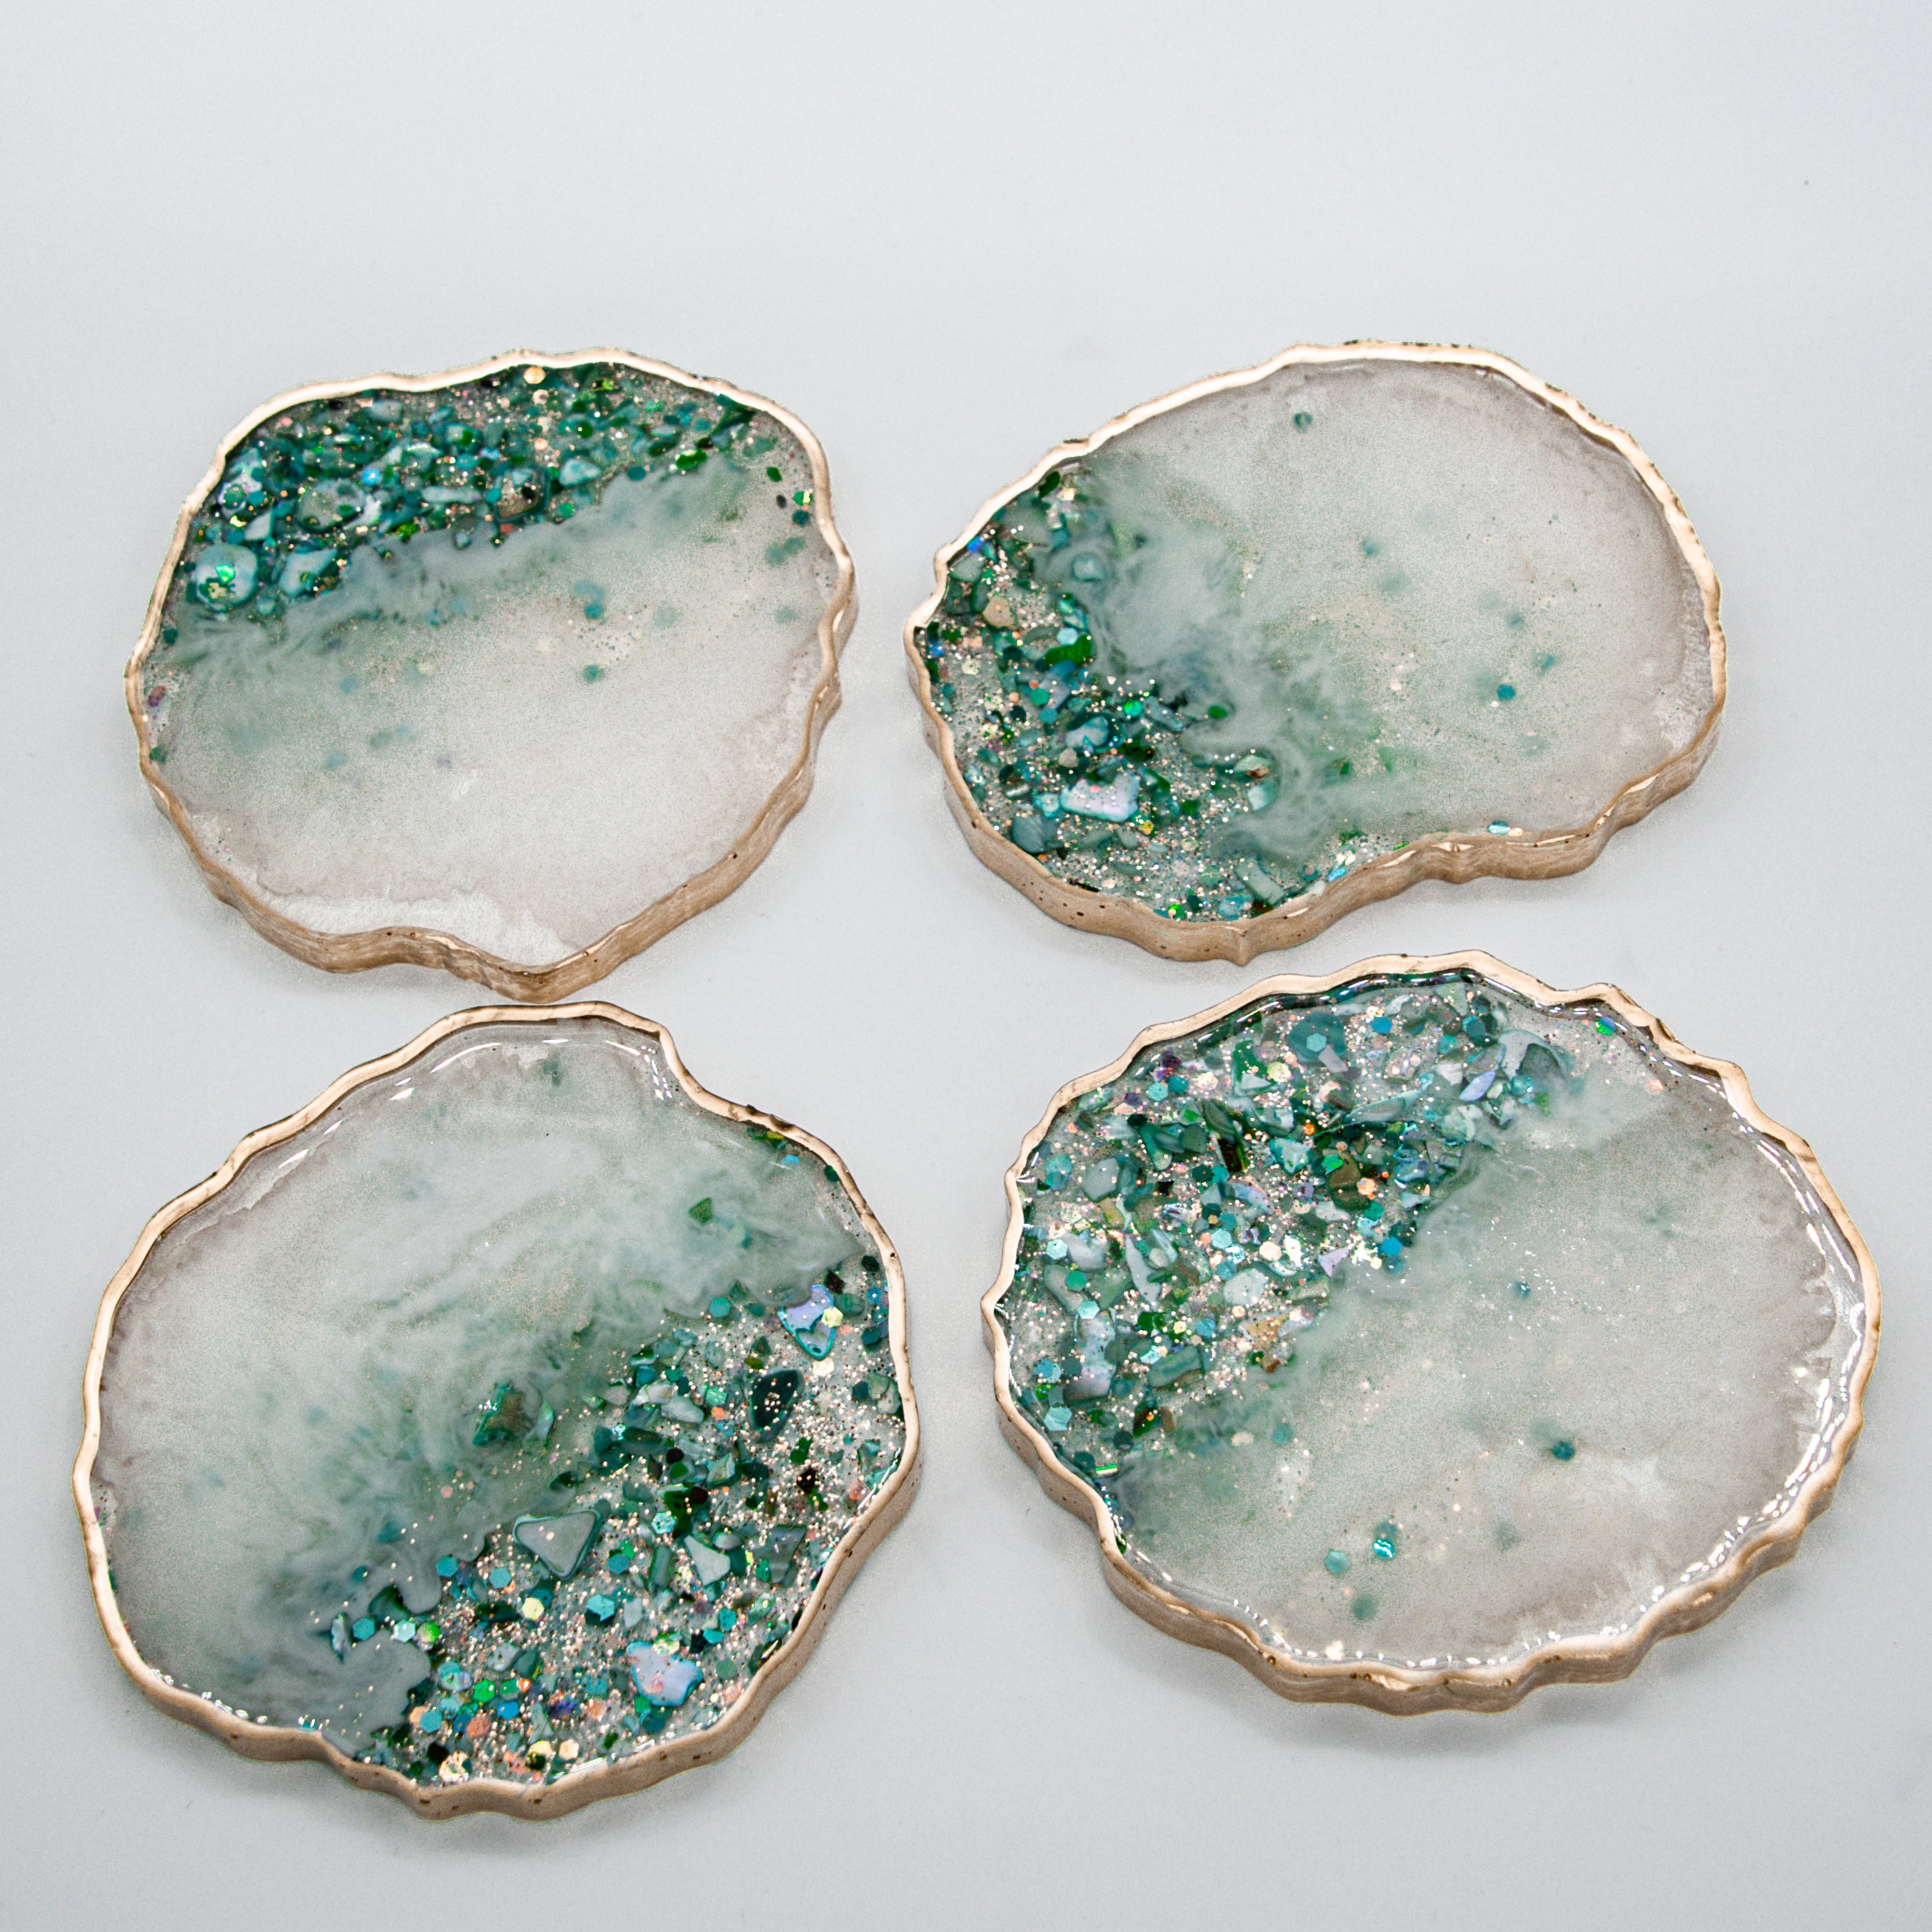 White Pearl Teal, Blue and Green Stones, Glitter and Shell Resin Coast –  Shirley's Loft